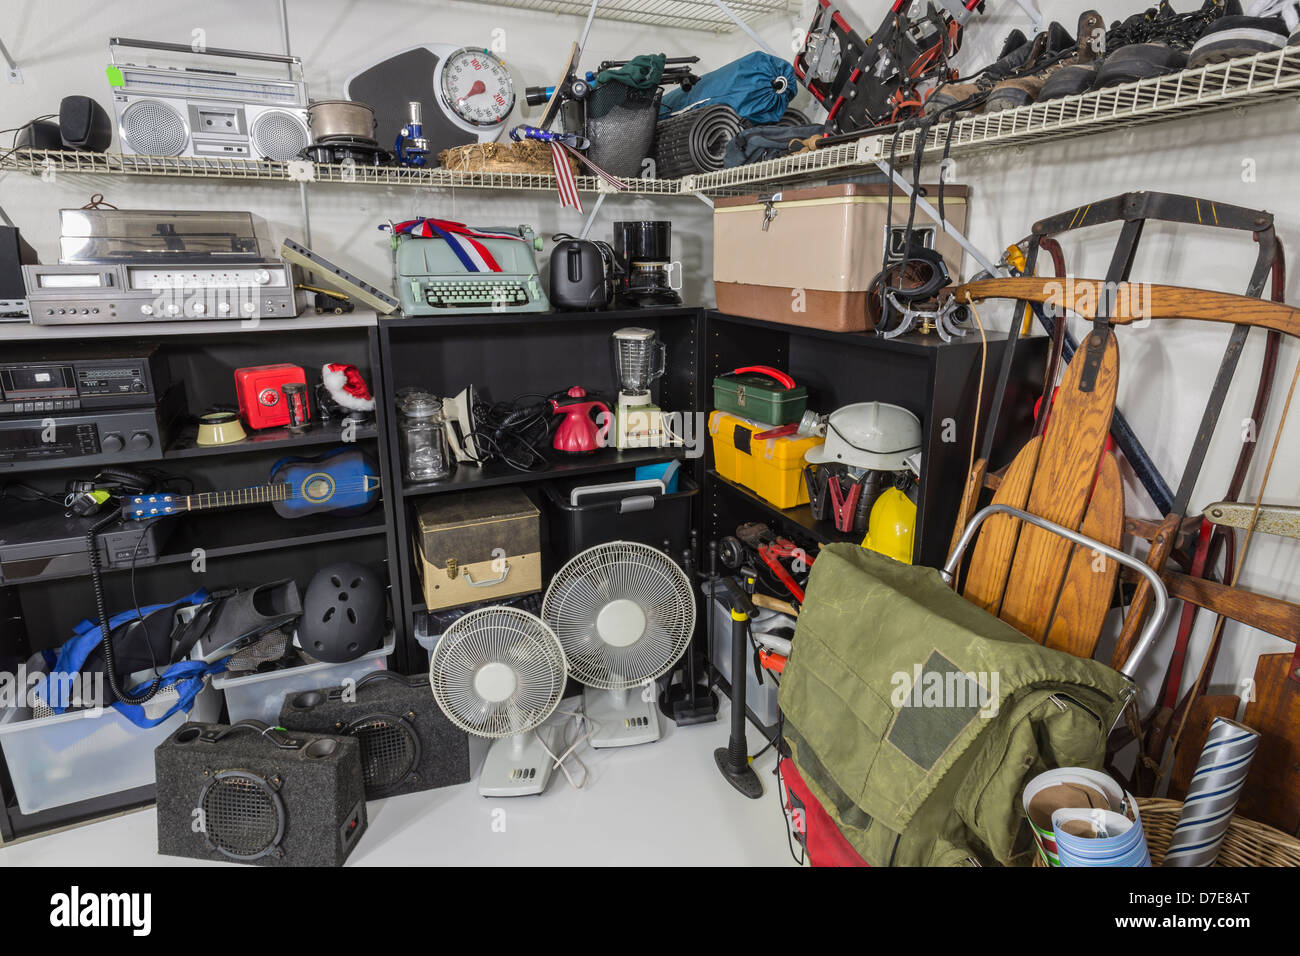 Vintage items in a residential garage sale setting. Stock Photo